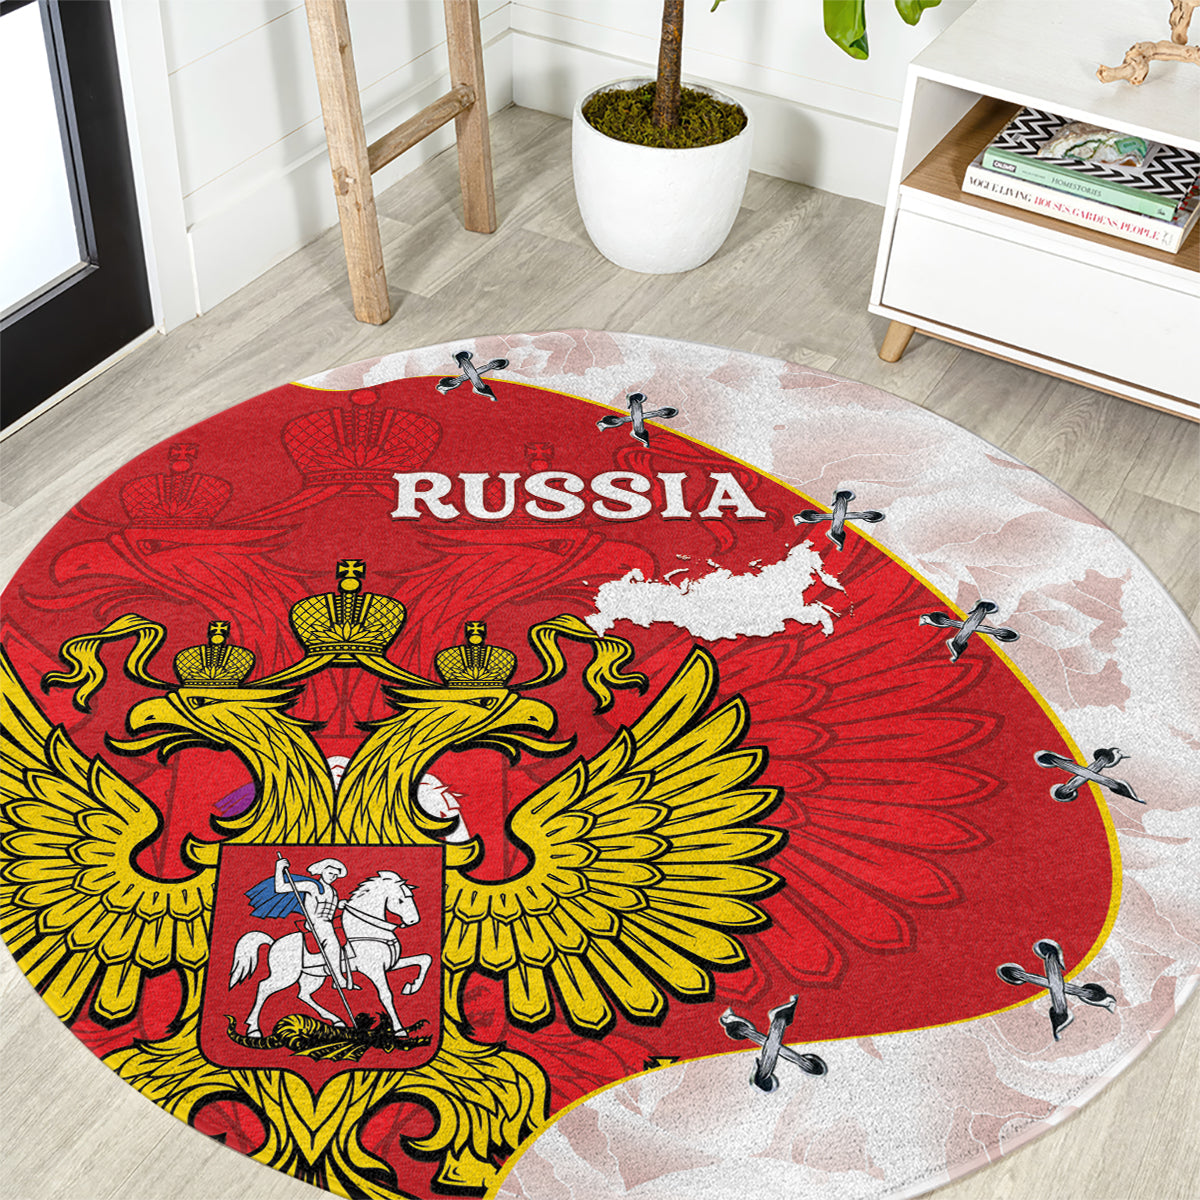 Russia Independence Day Round Carpet Coat Of Arms With Map